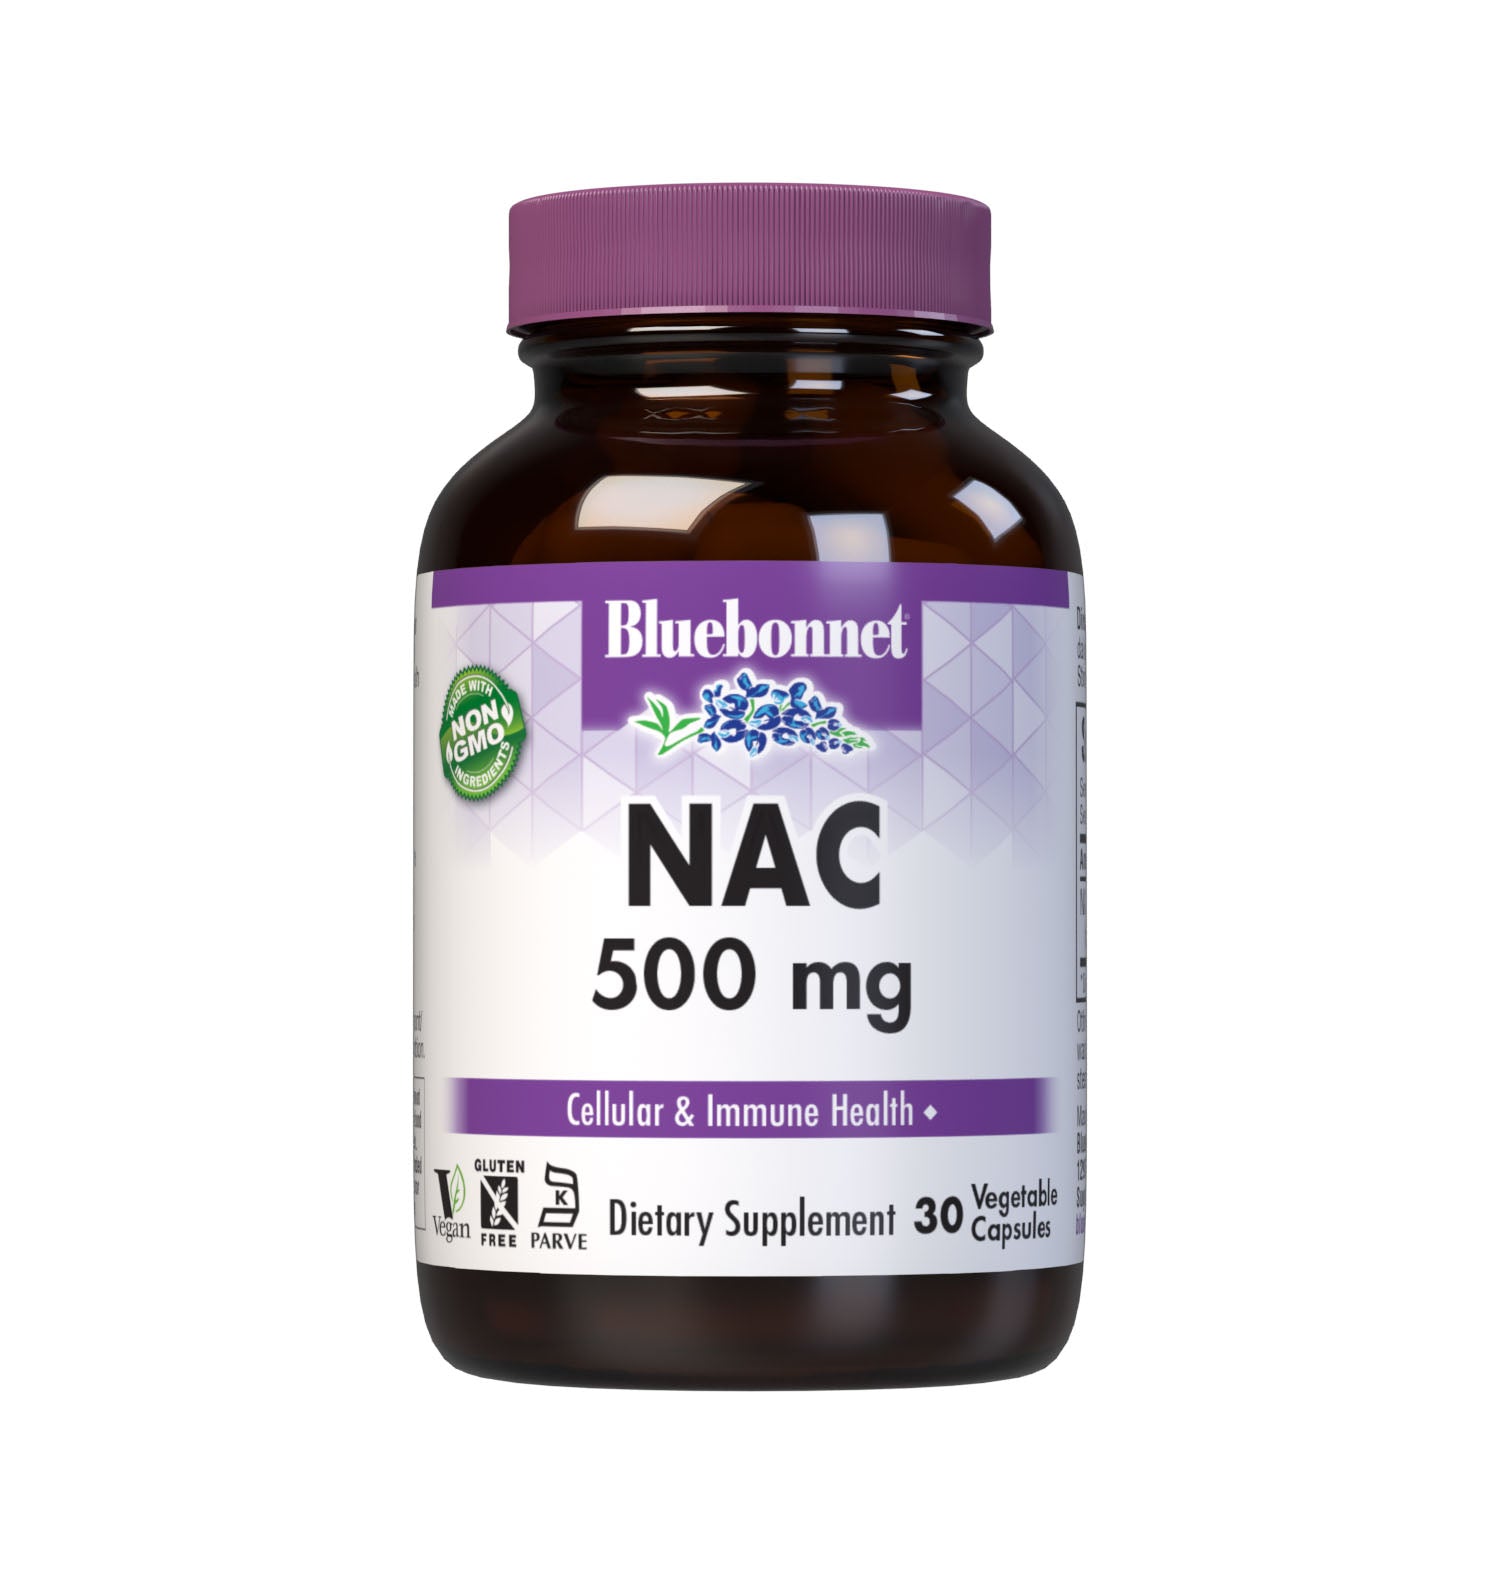 Bluebonnet’s NAC 500 mg 30 vegetable capsules are formulated with the free-form amino acid N-acetyl-cysteine in its crystalline form to help support cellular health and immune function. #size_30 count